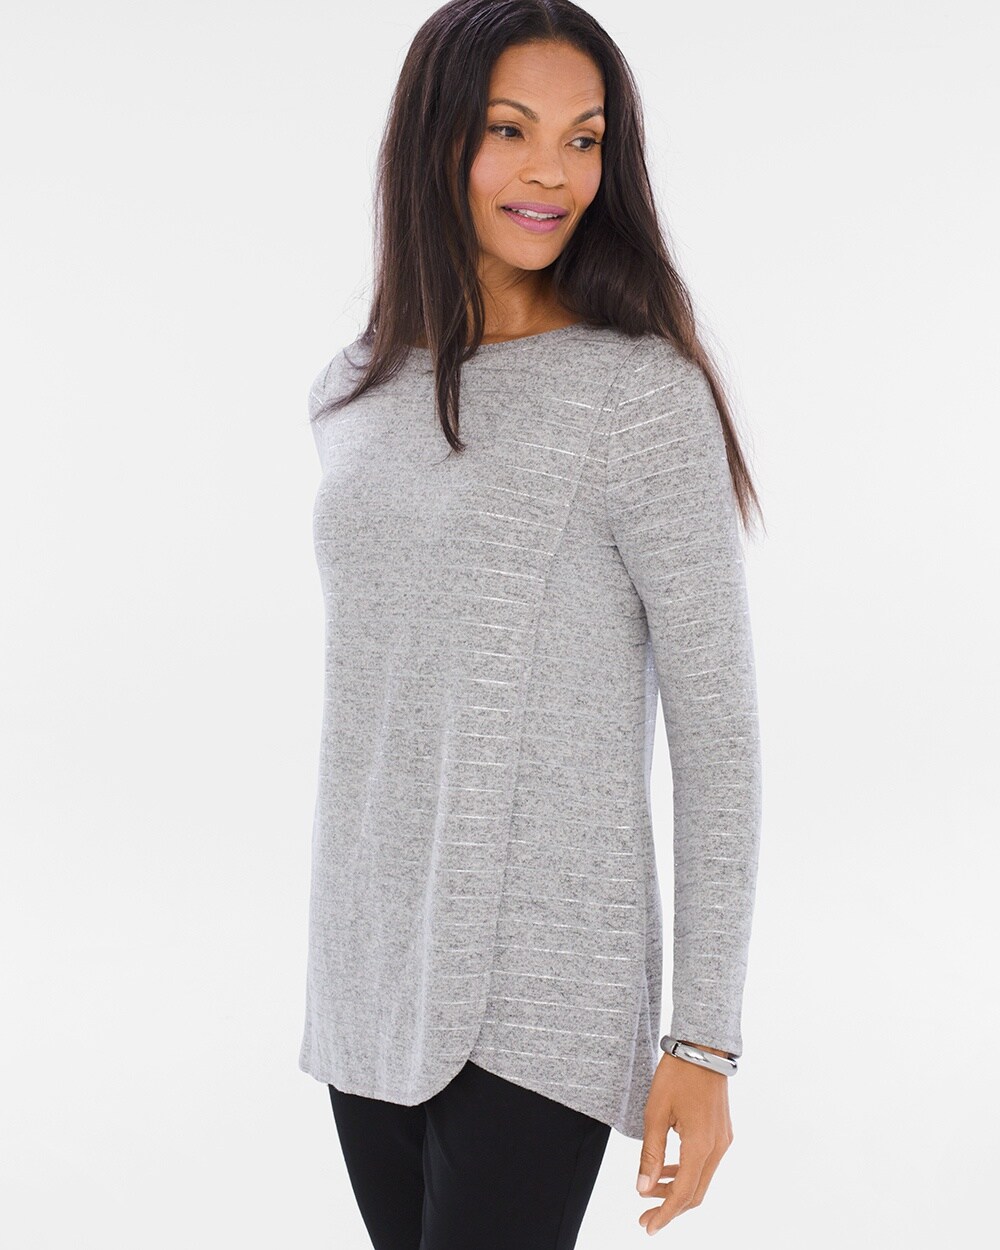 Zenergy Knit Collection Cozy Wrap-Front Tunic